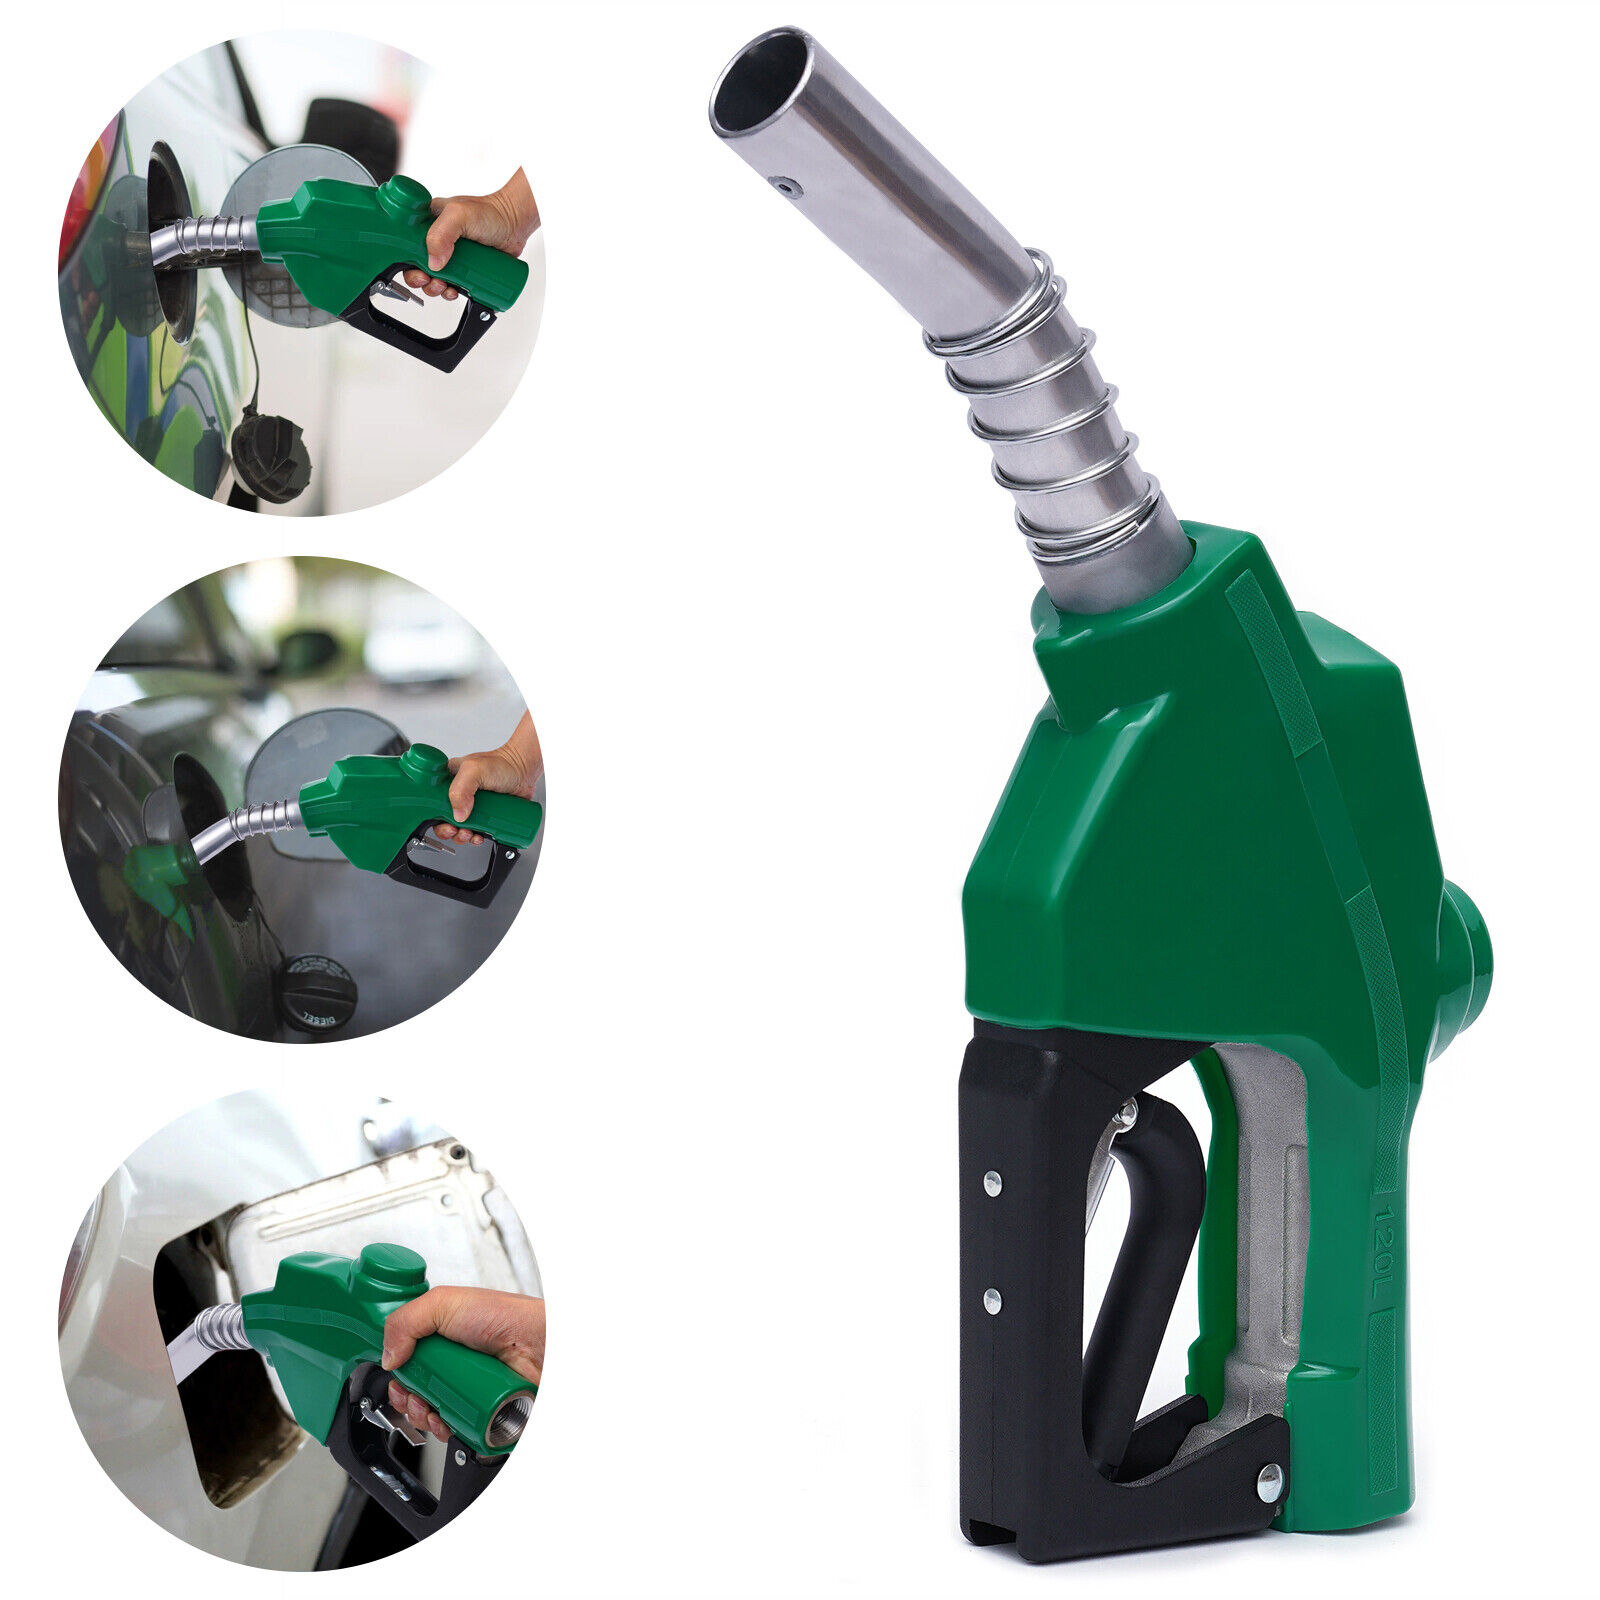 YIYIBYUS Auto Shut-Off Fuel Nozzle Gas Pump Fuel Gun for Gas Stations Fuel Refilling, Max Flow Rate 31.7GAL/Min - image 1 of 12